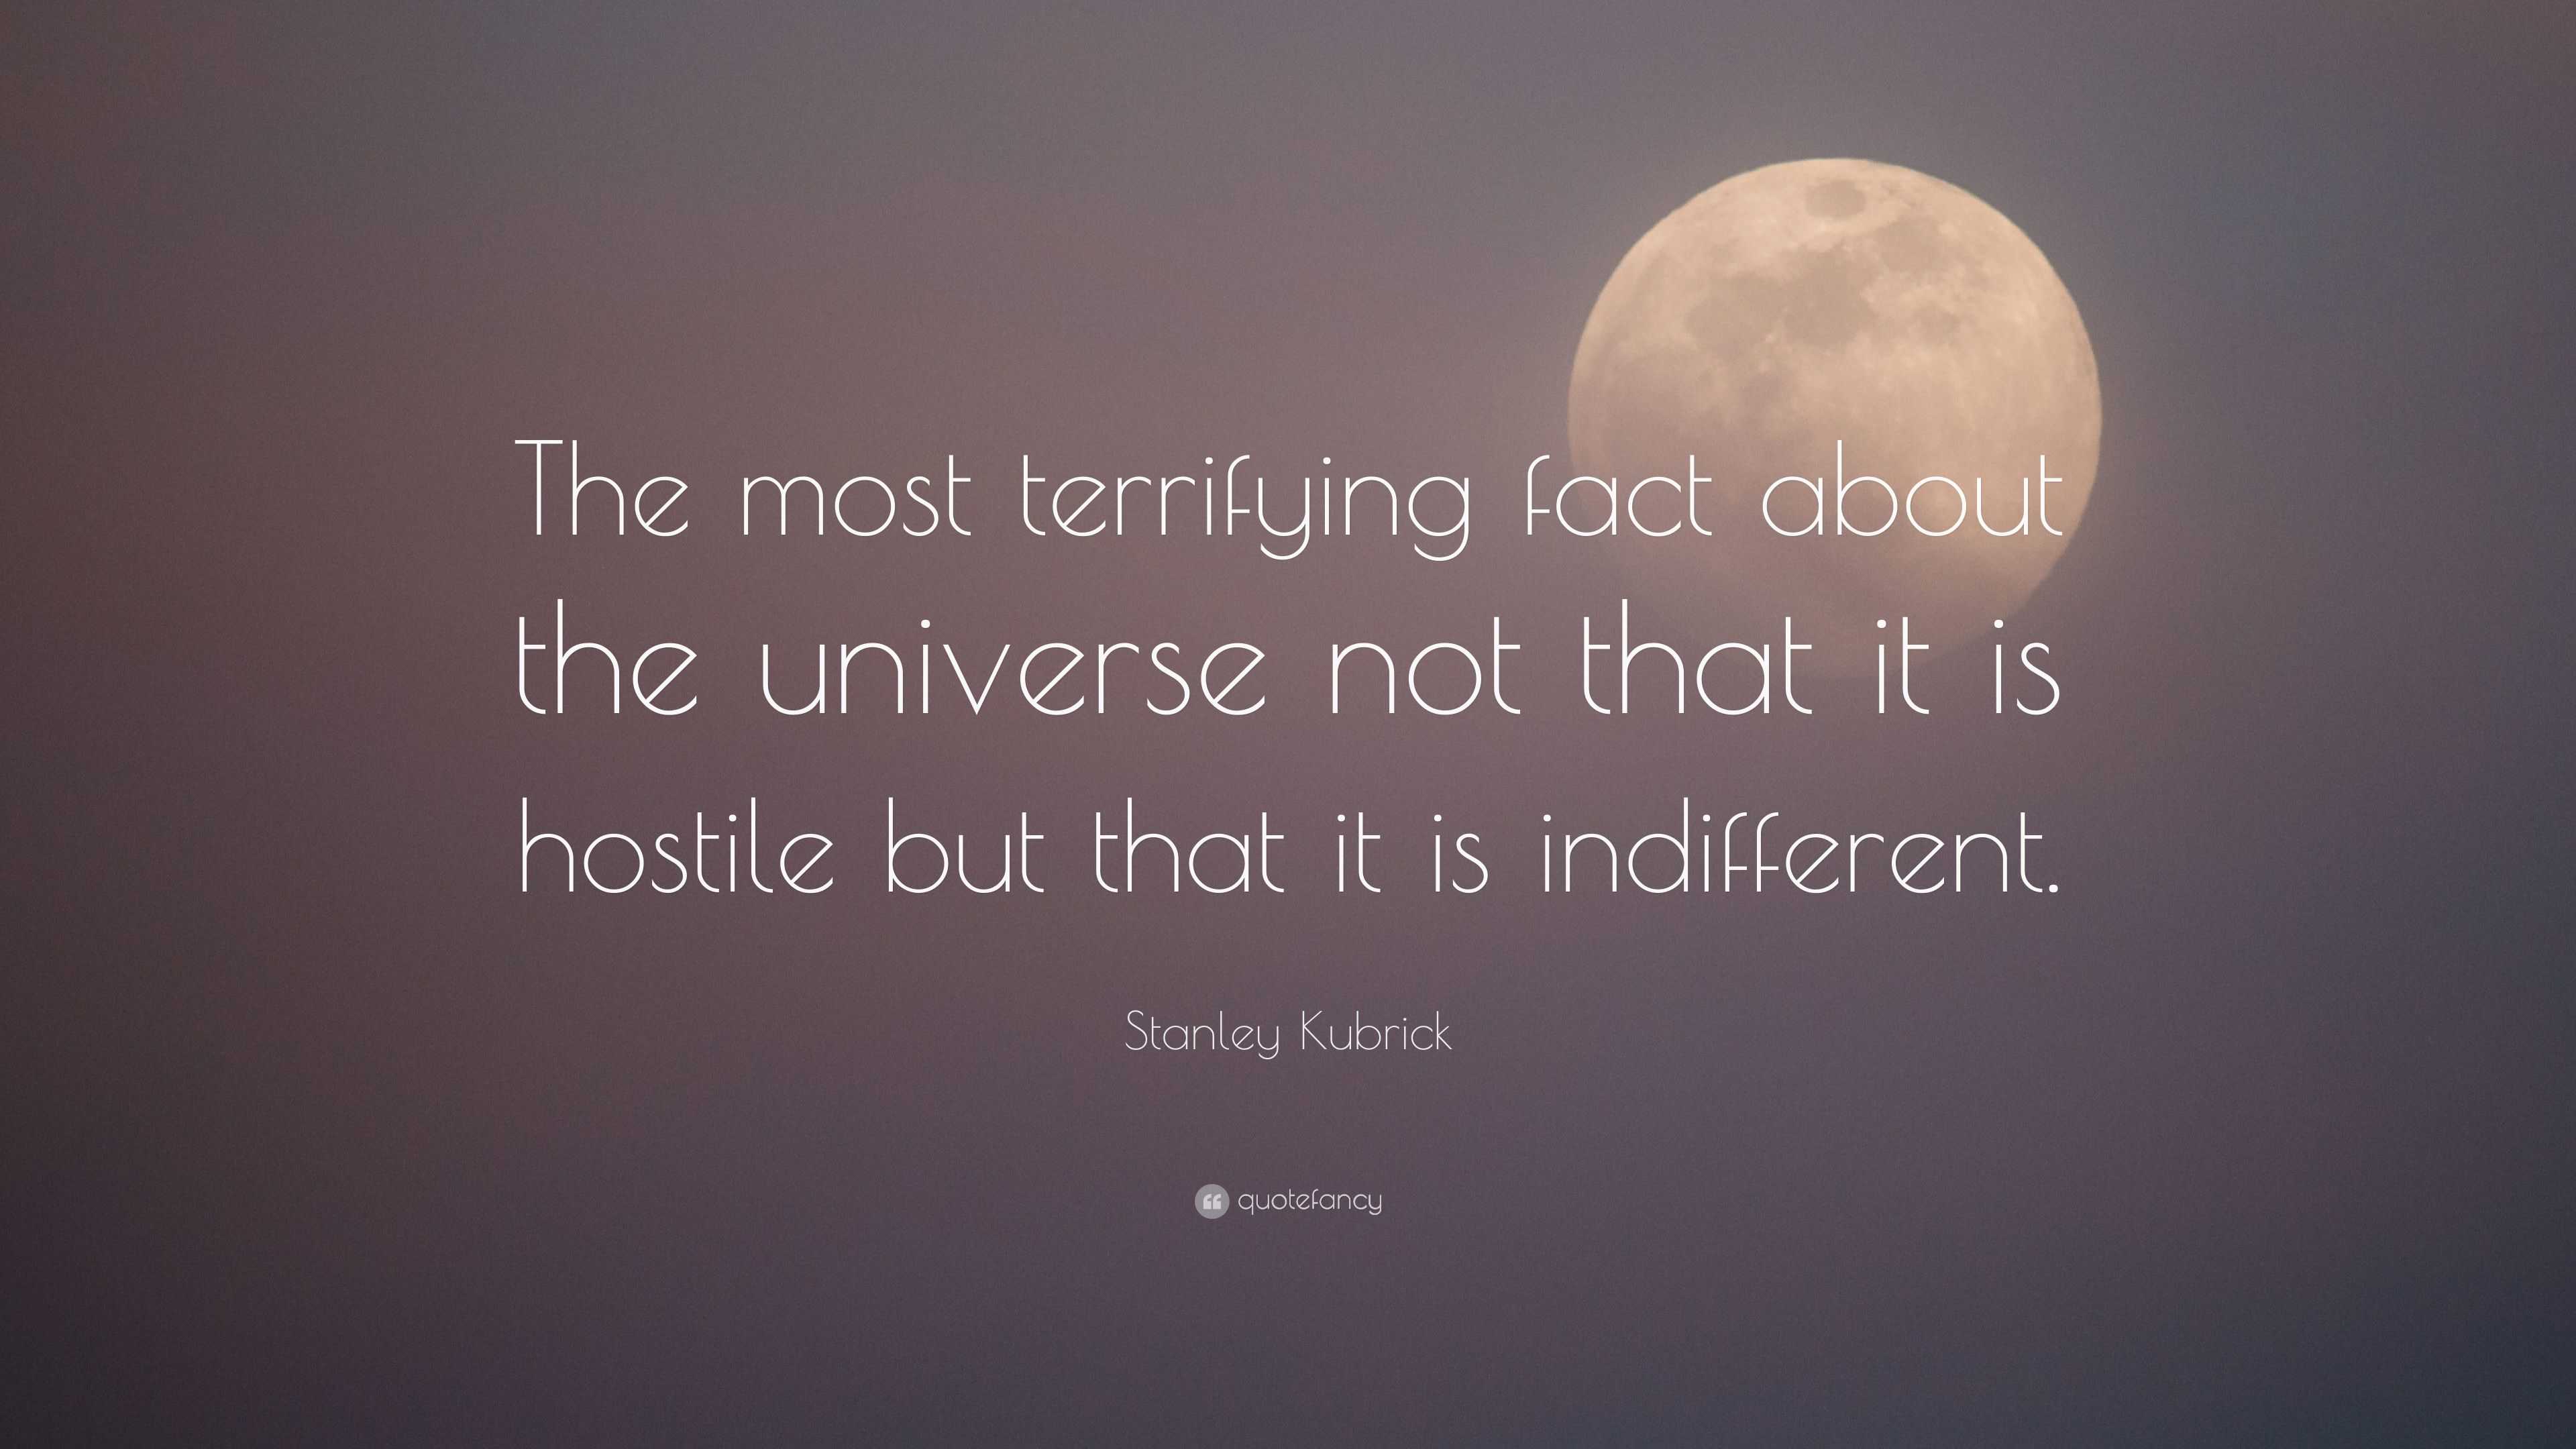 Stanley Kubrick Quote: “The most terrifying fact about the universe not ...